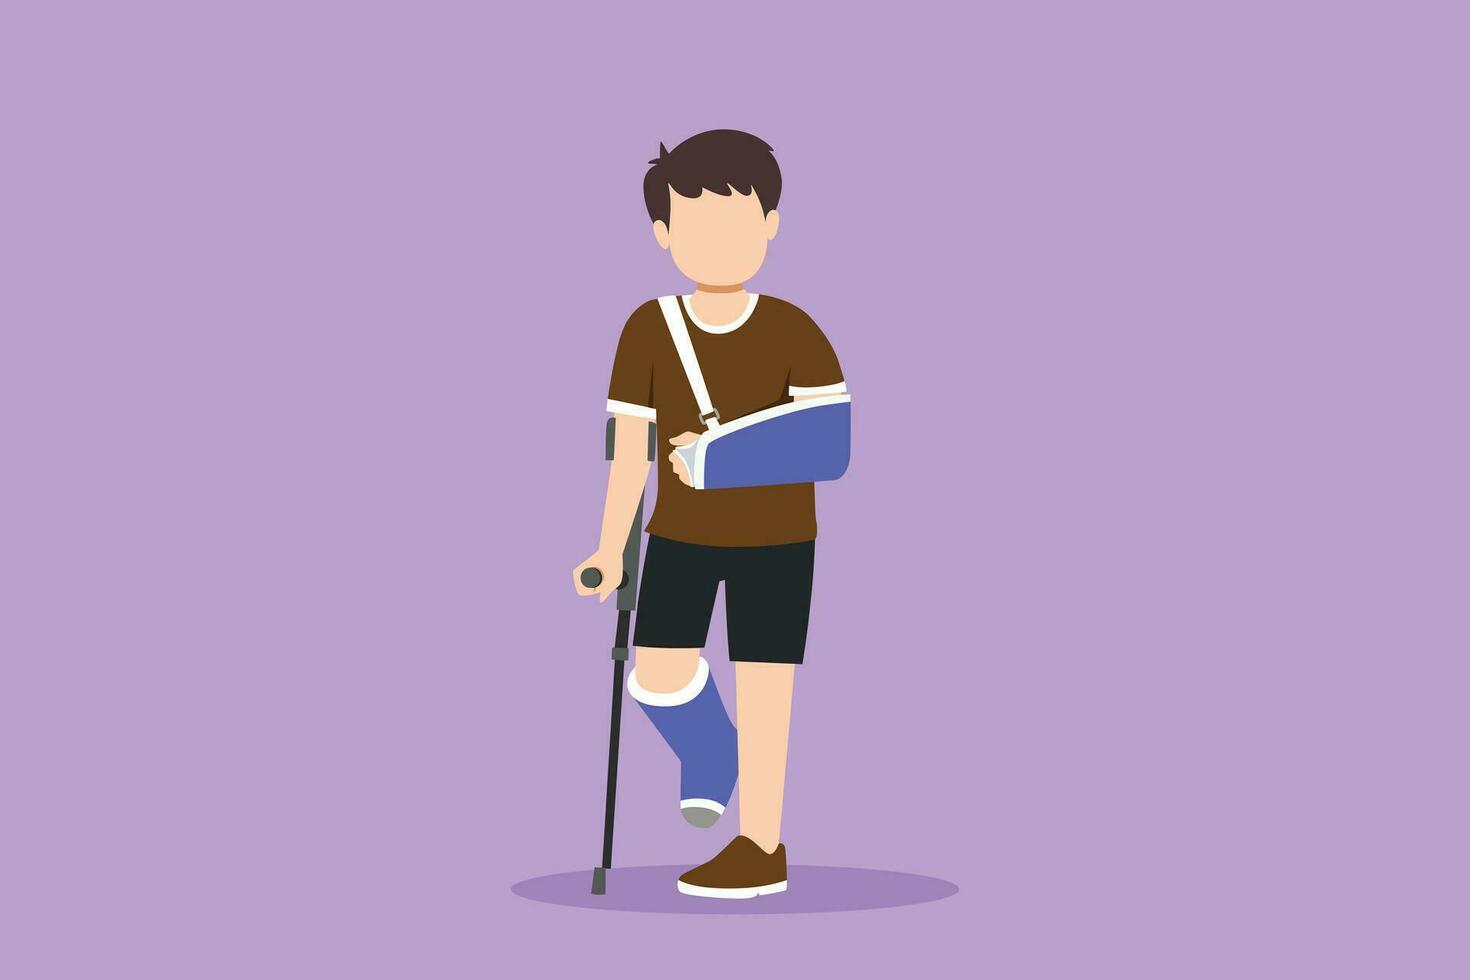 Cartoon flat style drawing of sad injured kids with broken arm and leg in gypsum. Full length of upset injured little boy standing on crutches in medical hospital. Graphic design vector illustration